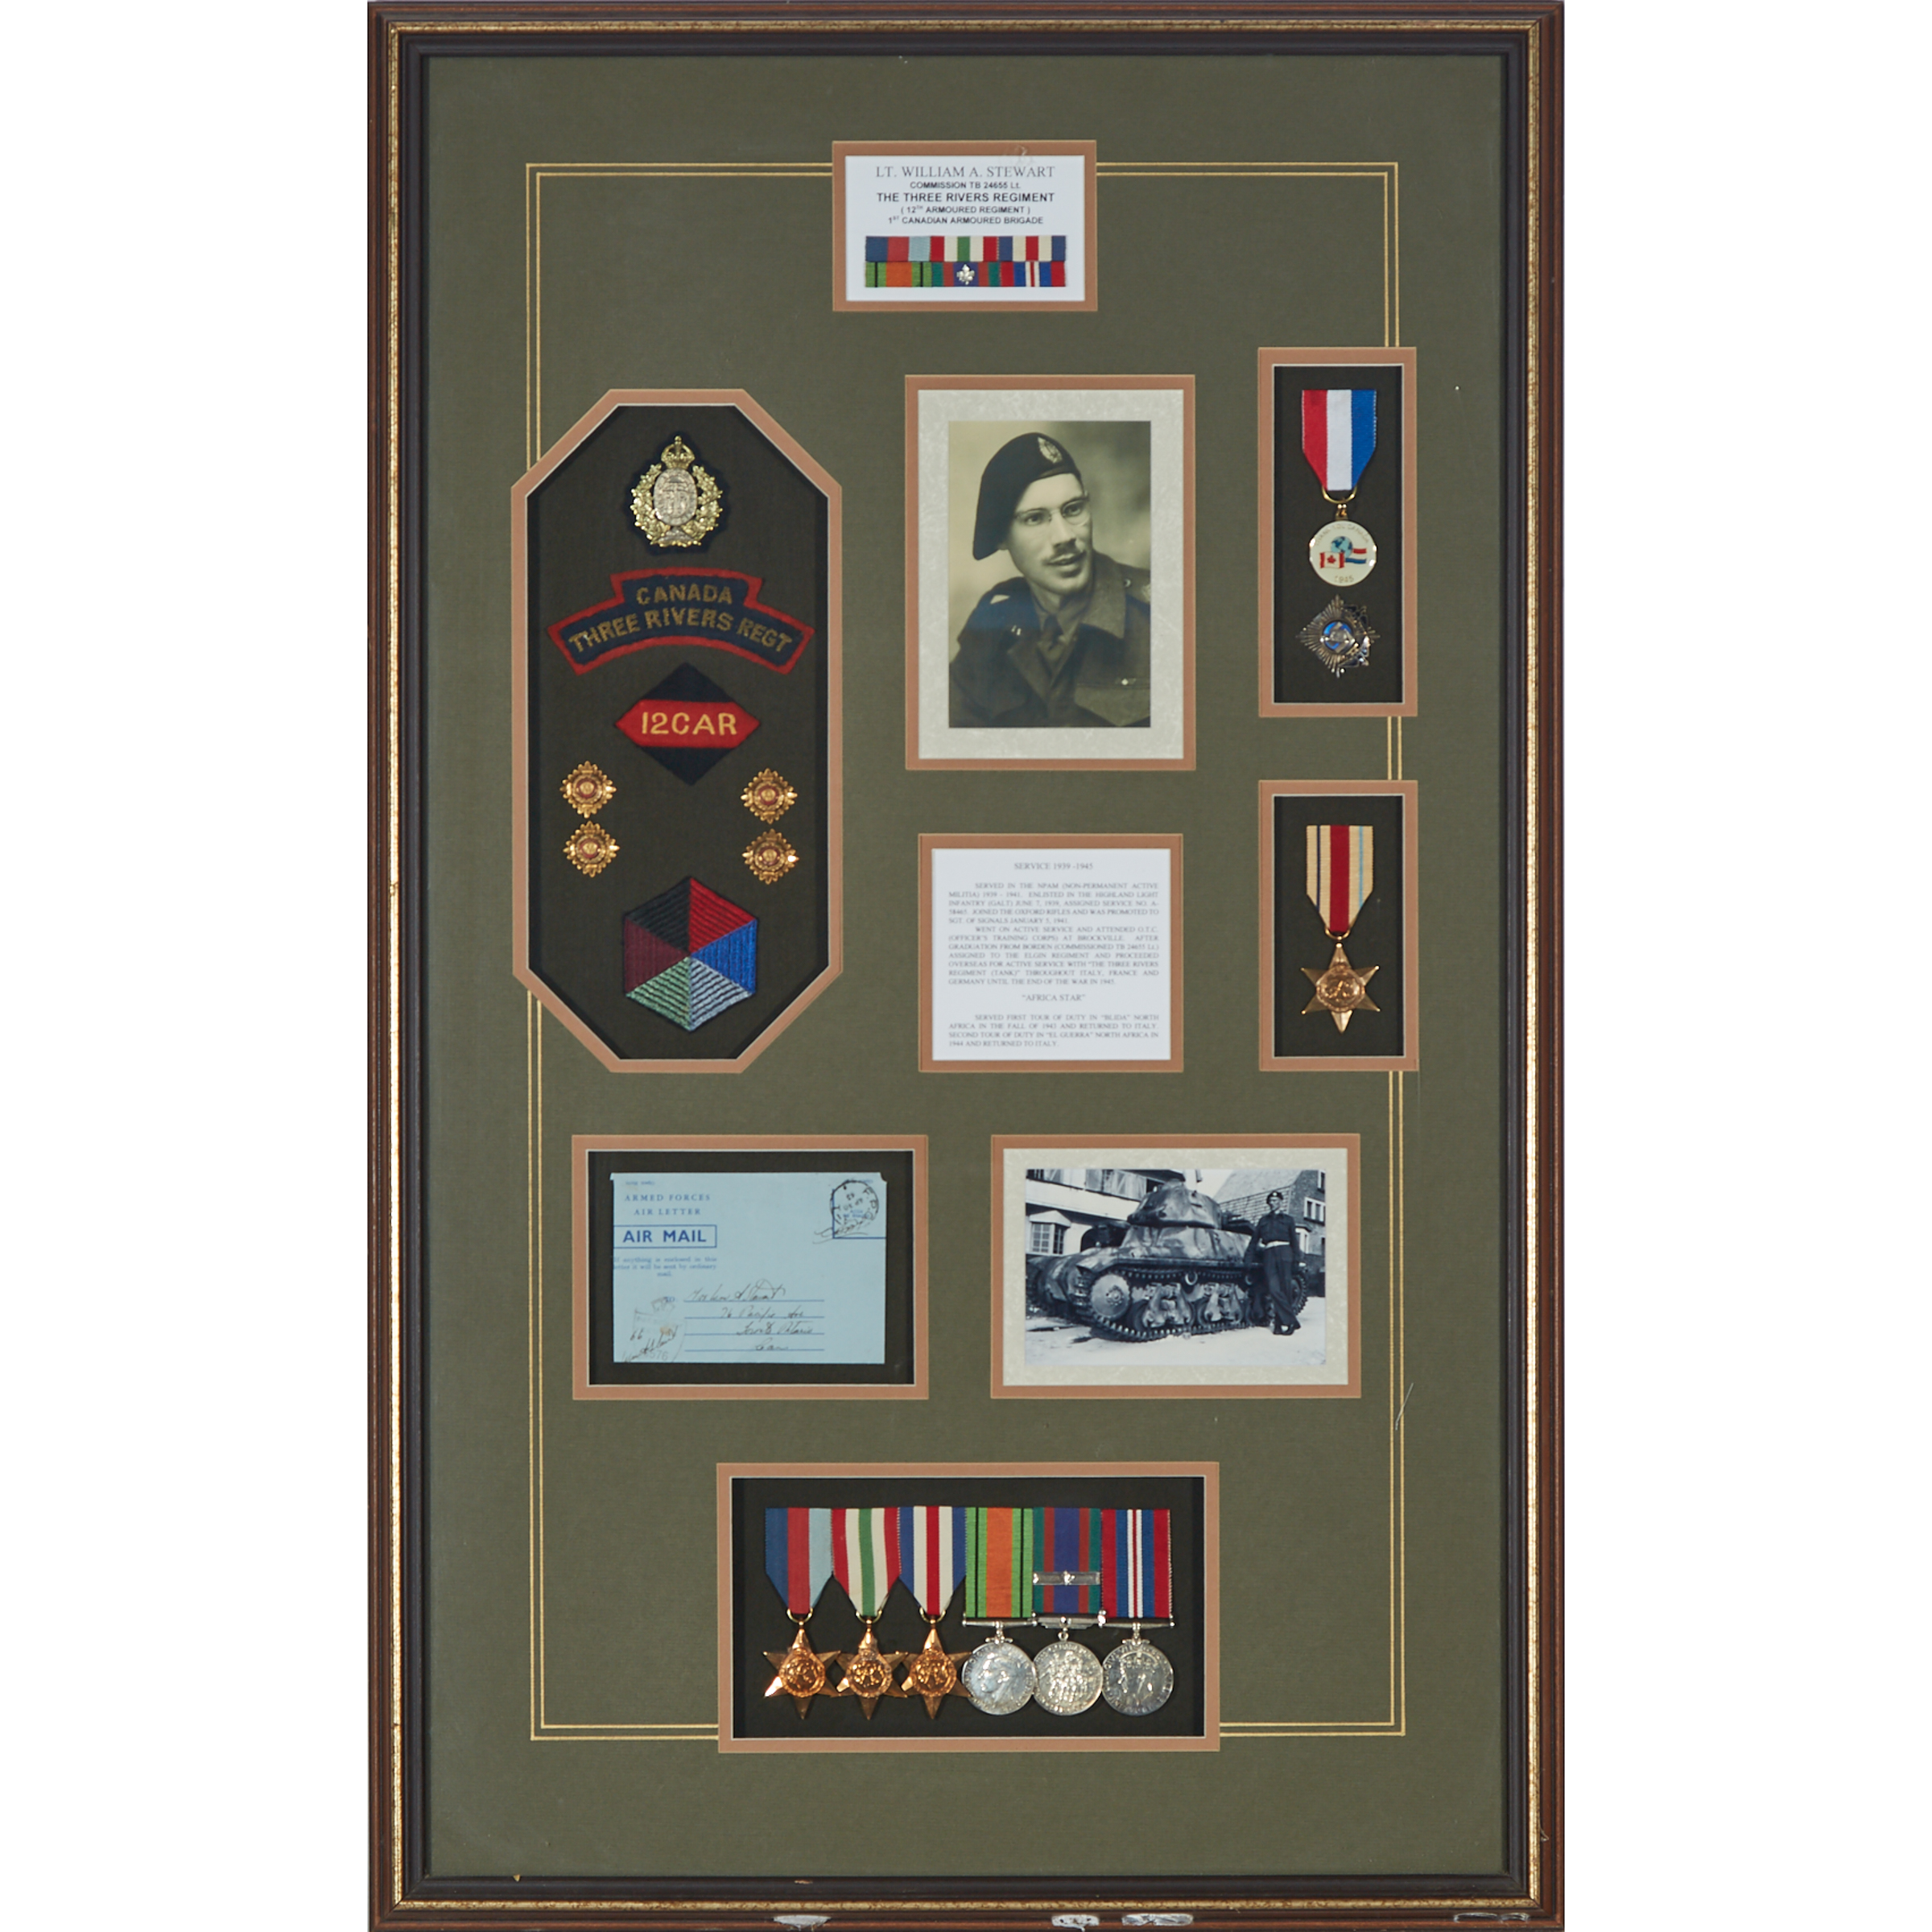 Lt. William A. Stewart, Three Rivers Regiment, WWII Medal Group and Archive, 1943-45